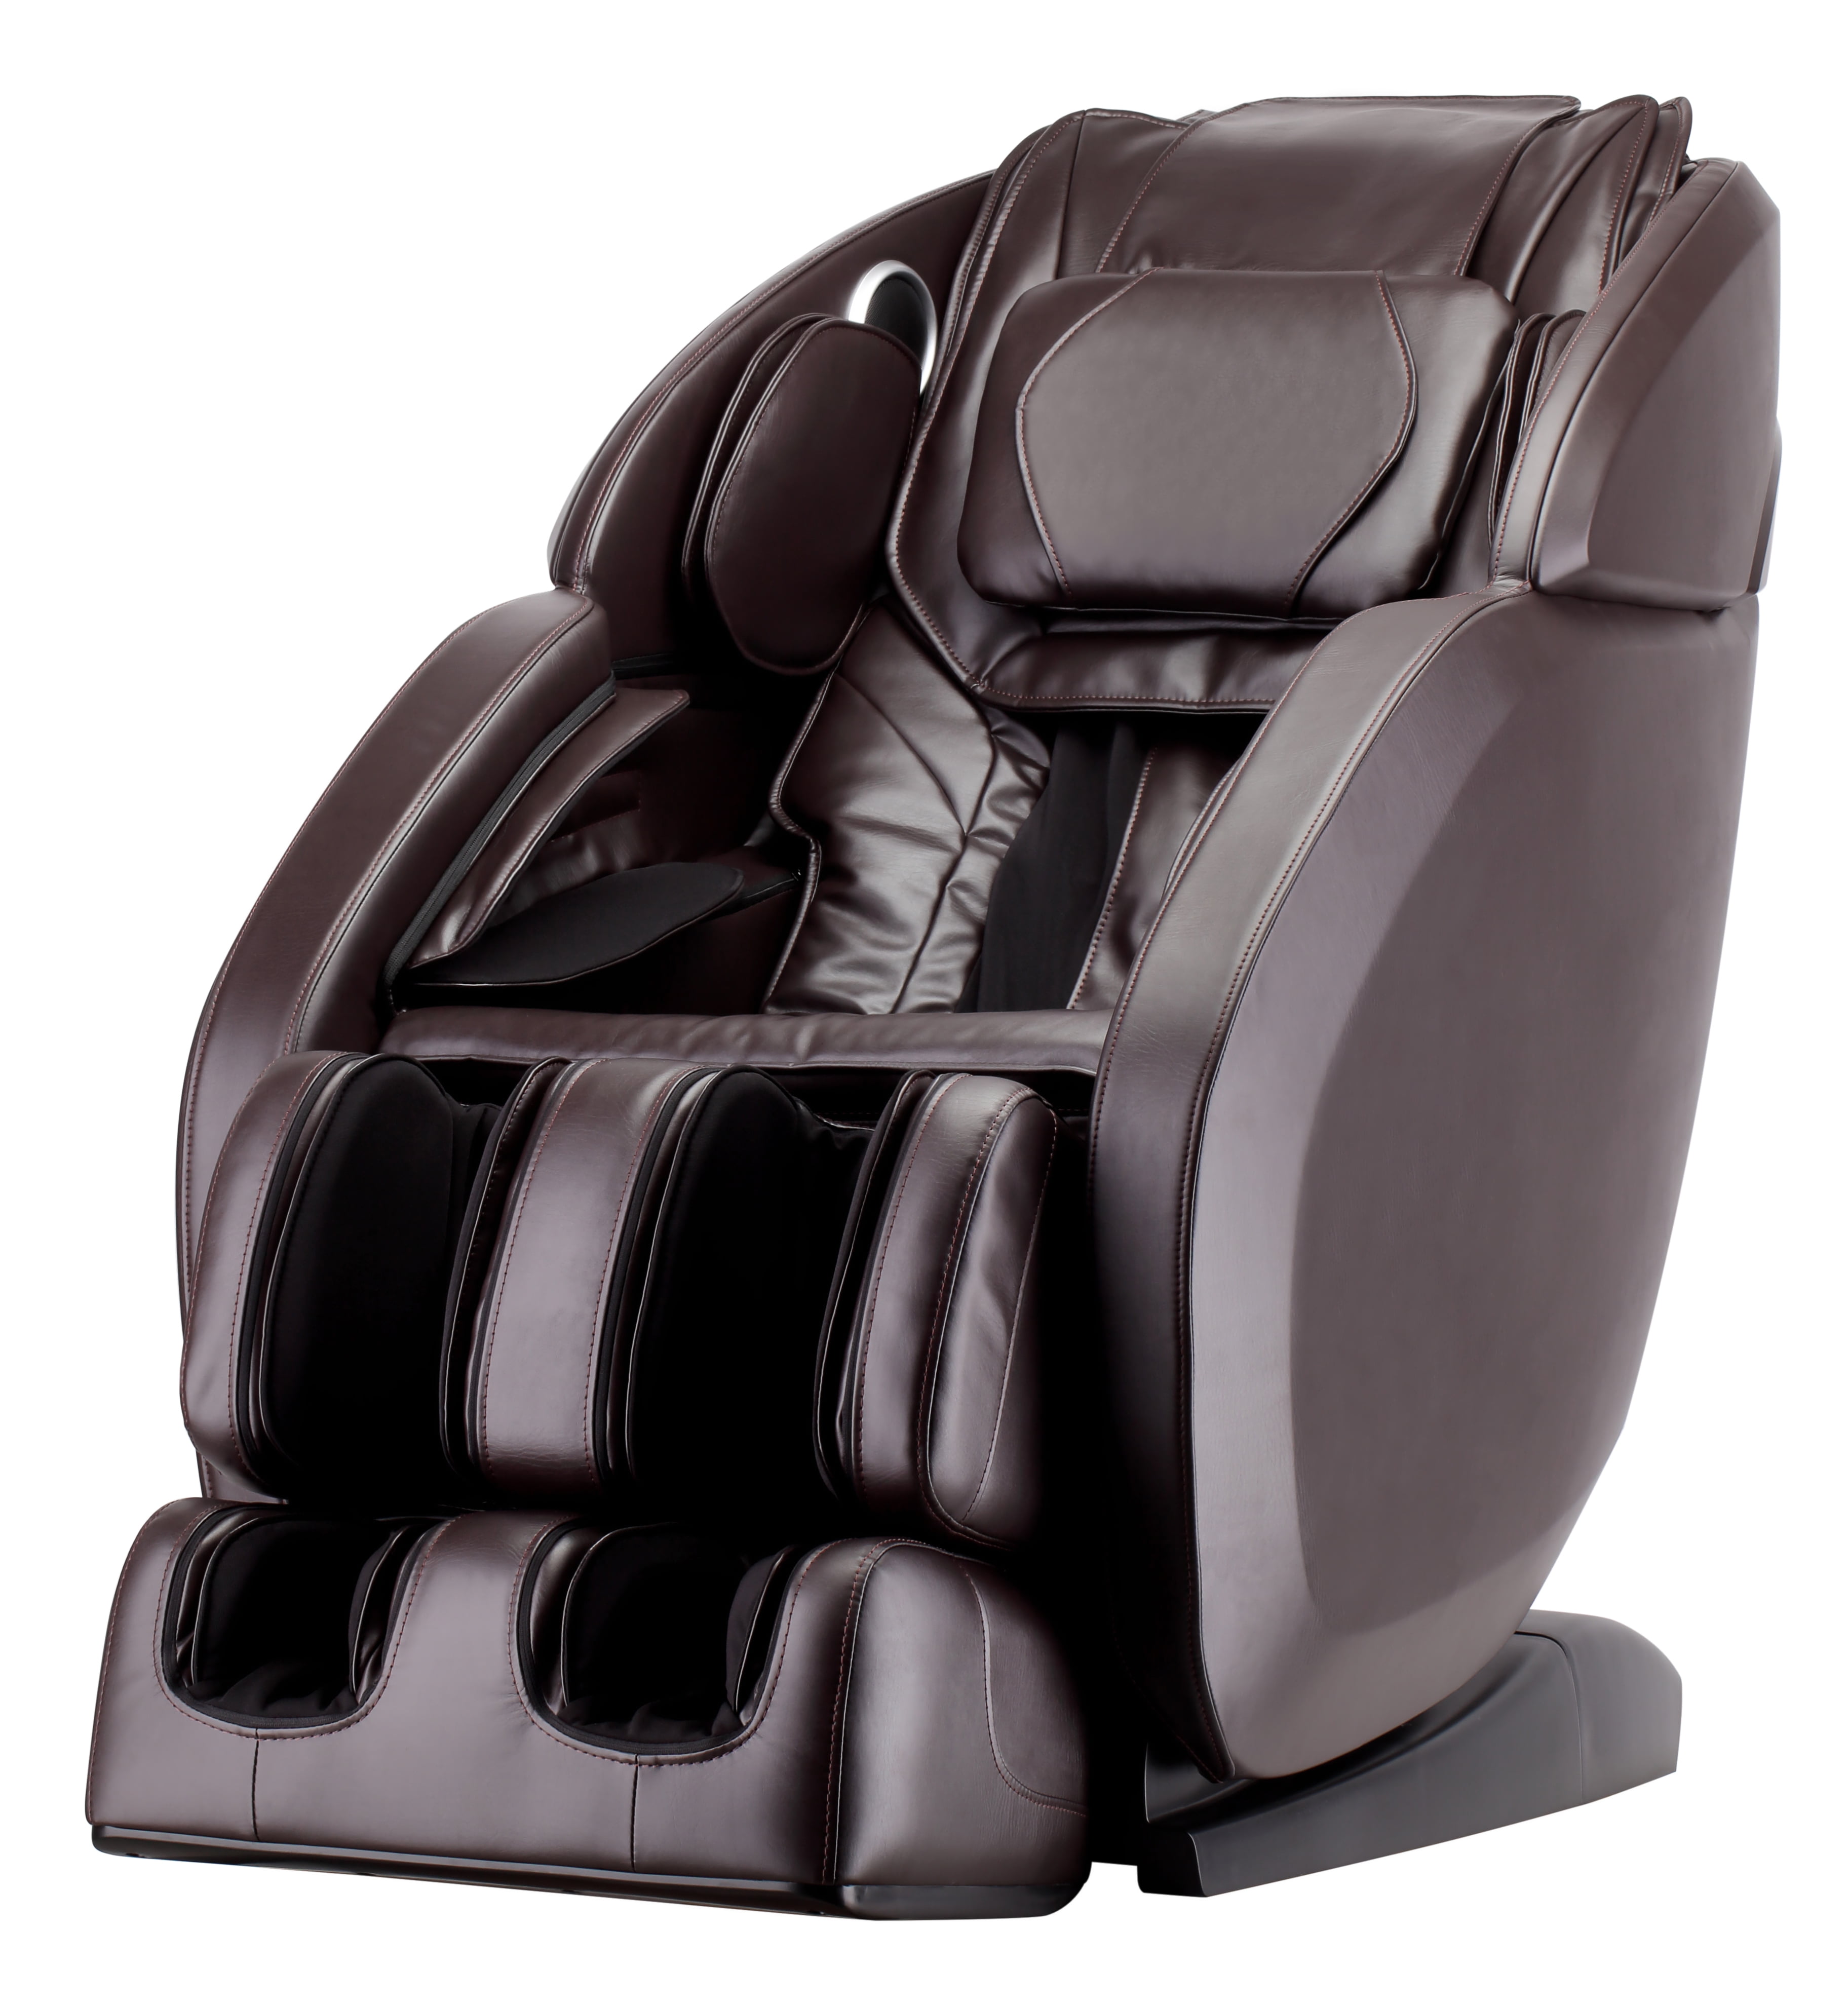 Lifesmart Large R8662 Massage And Wellness Chair With Therapy Programing